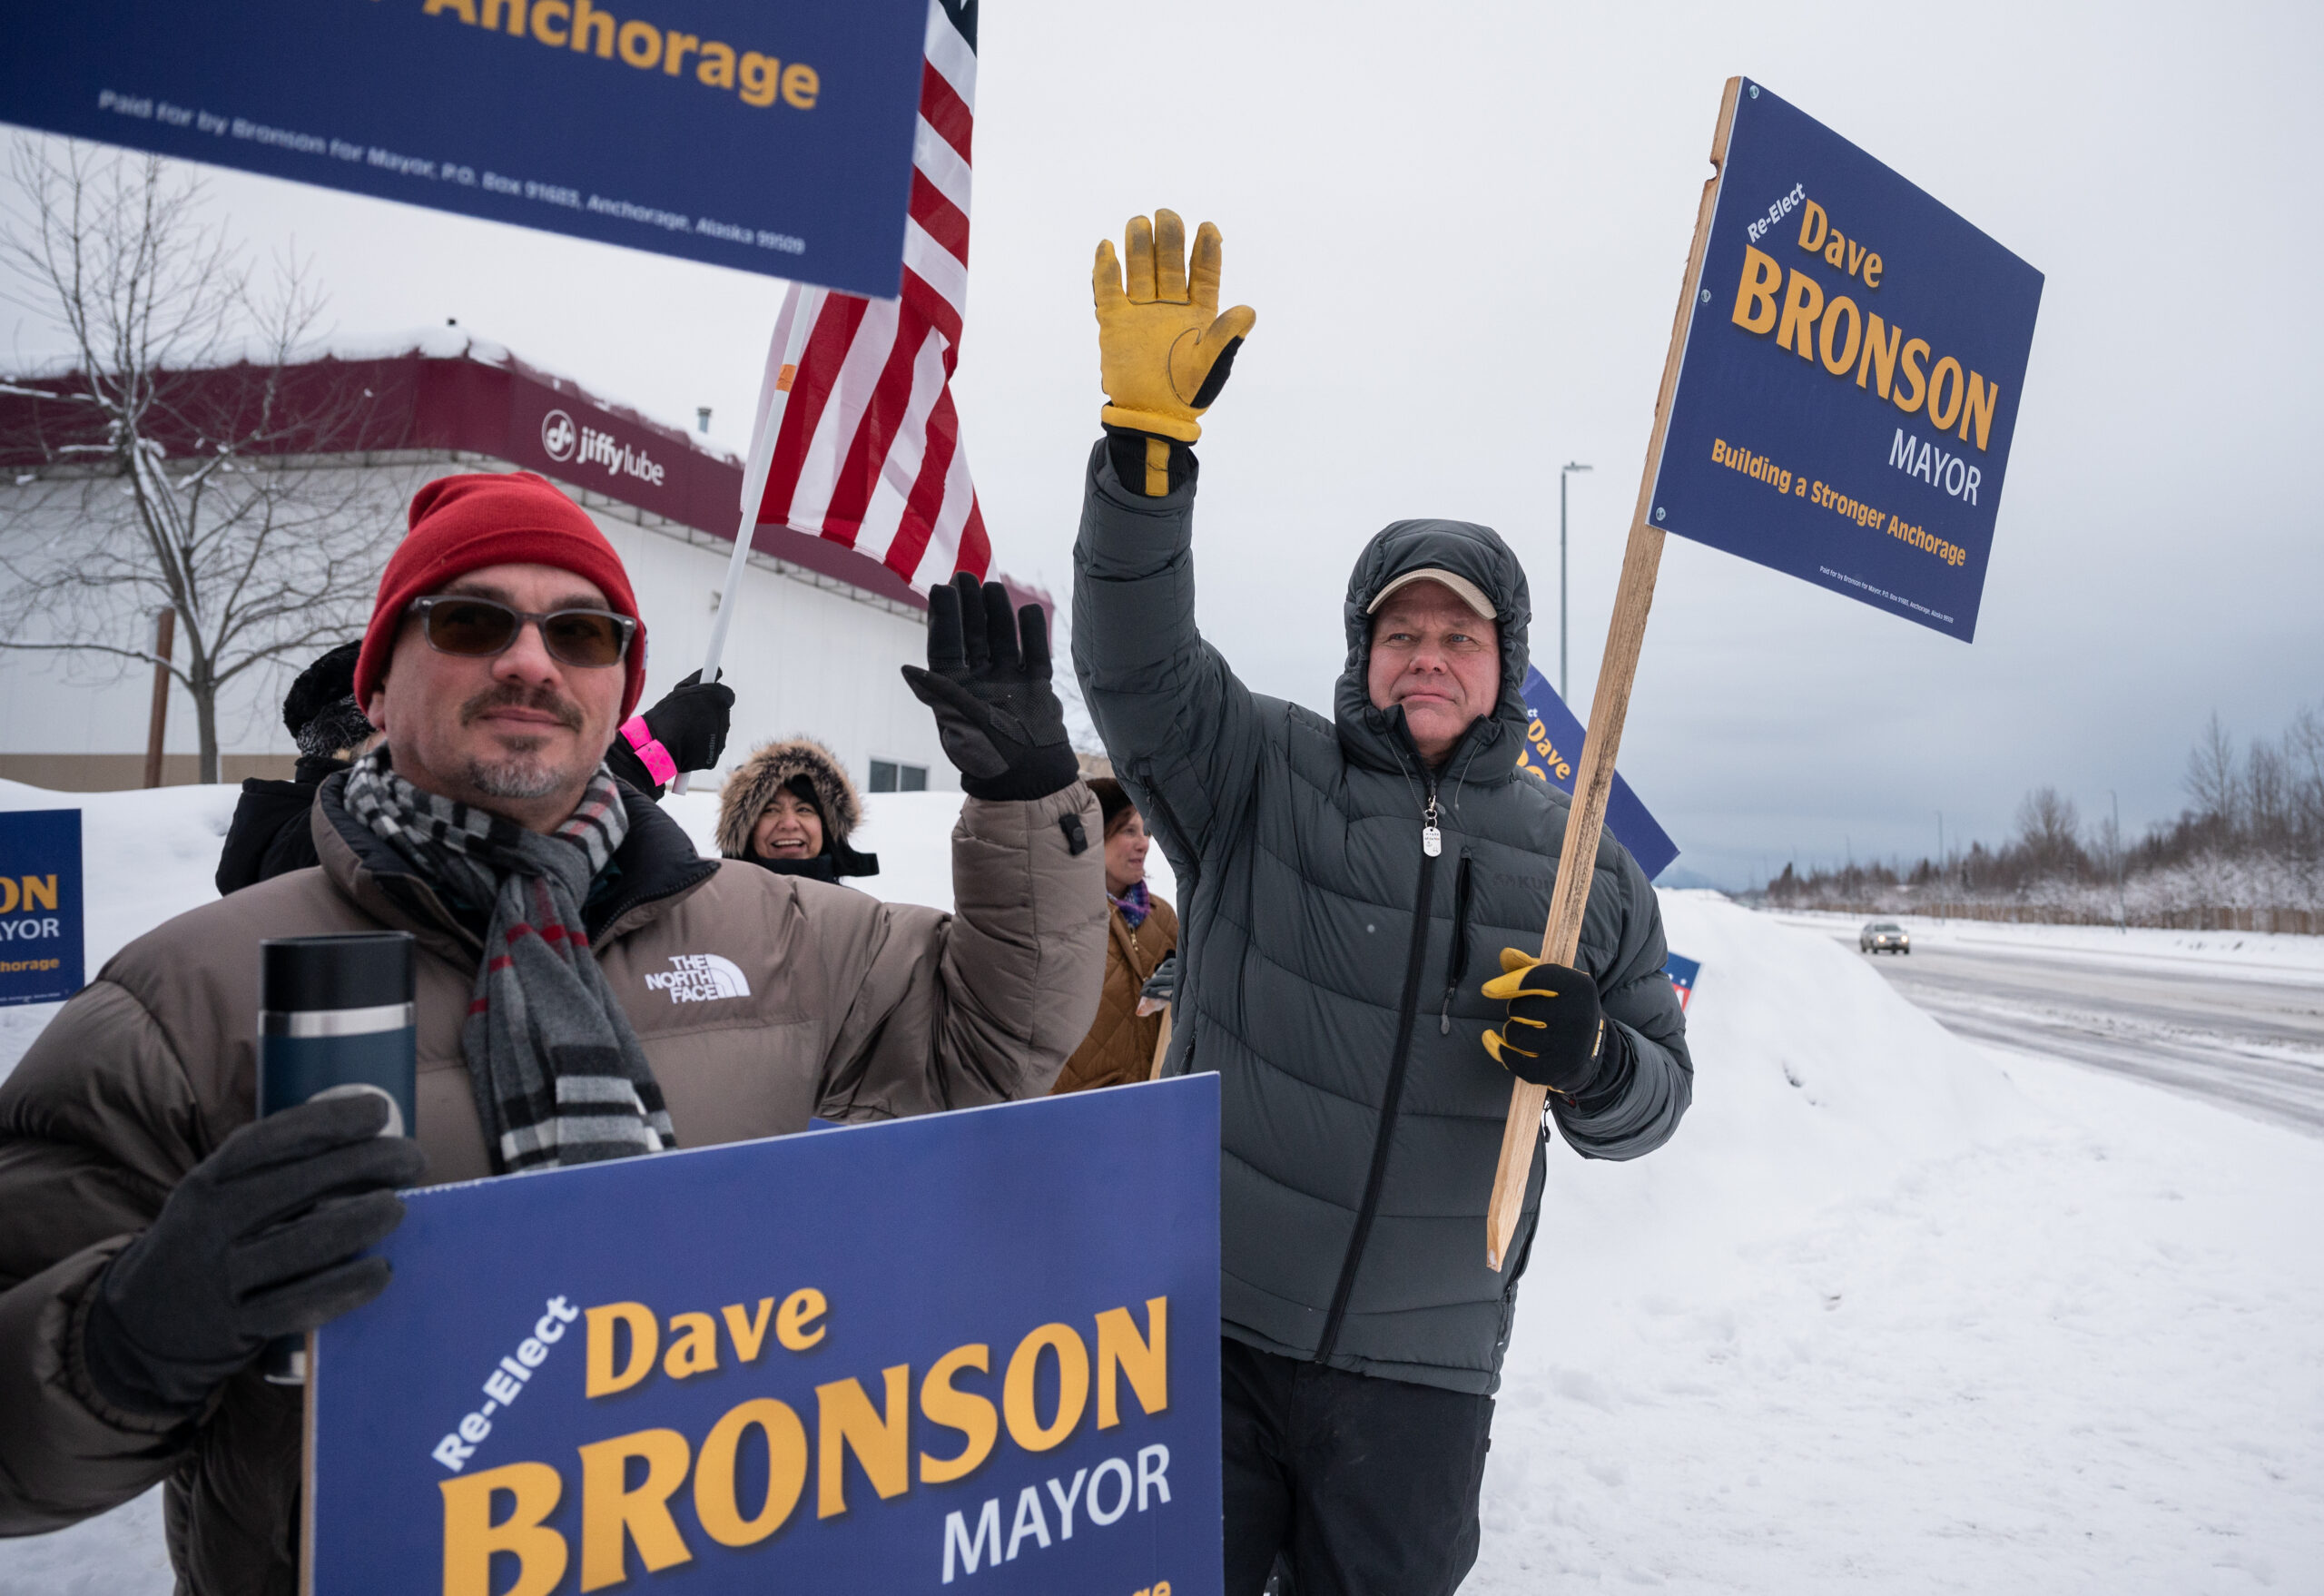 A man in a black puffy jacket stands outside waving a mayoral campaign sign